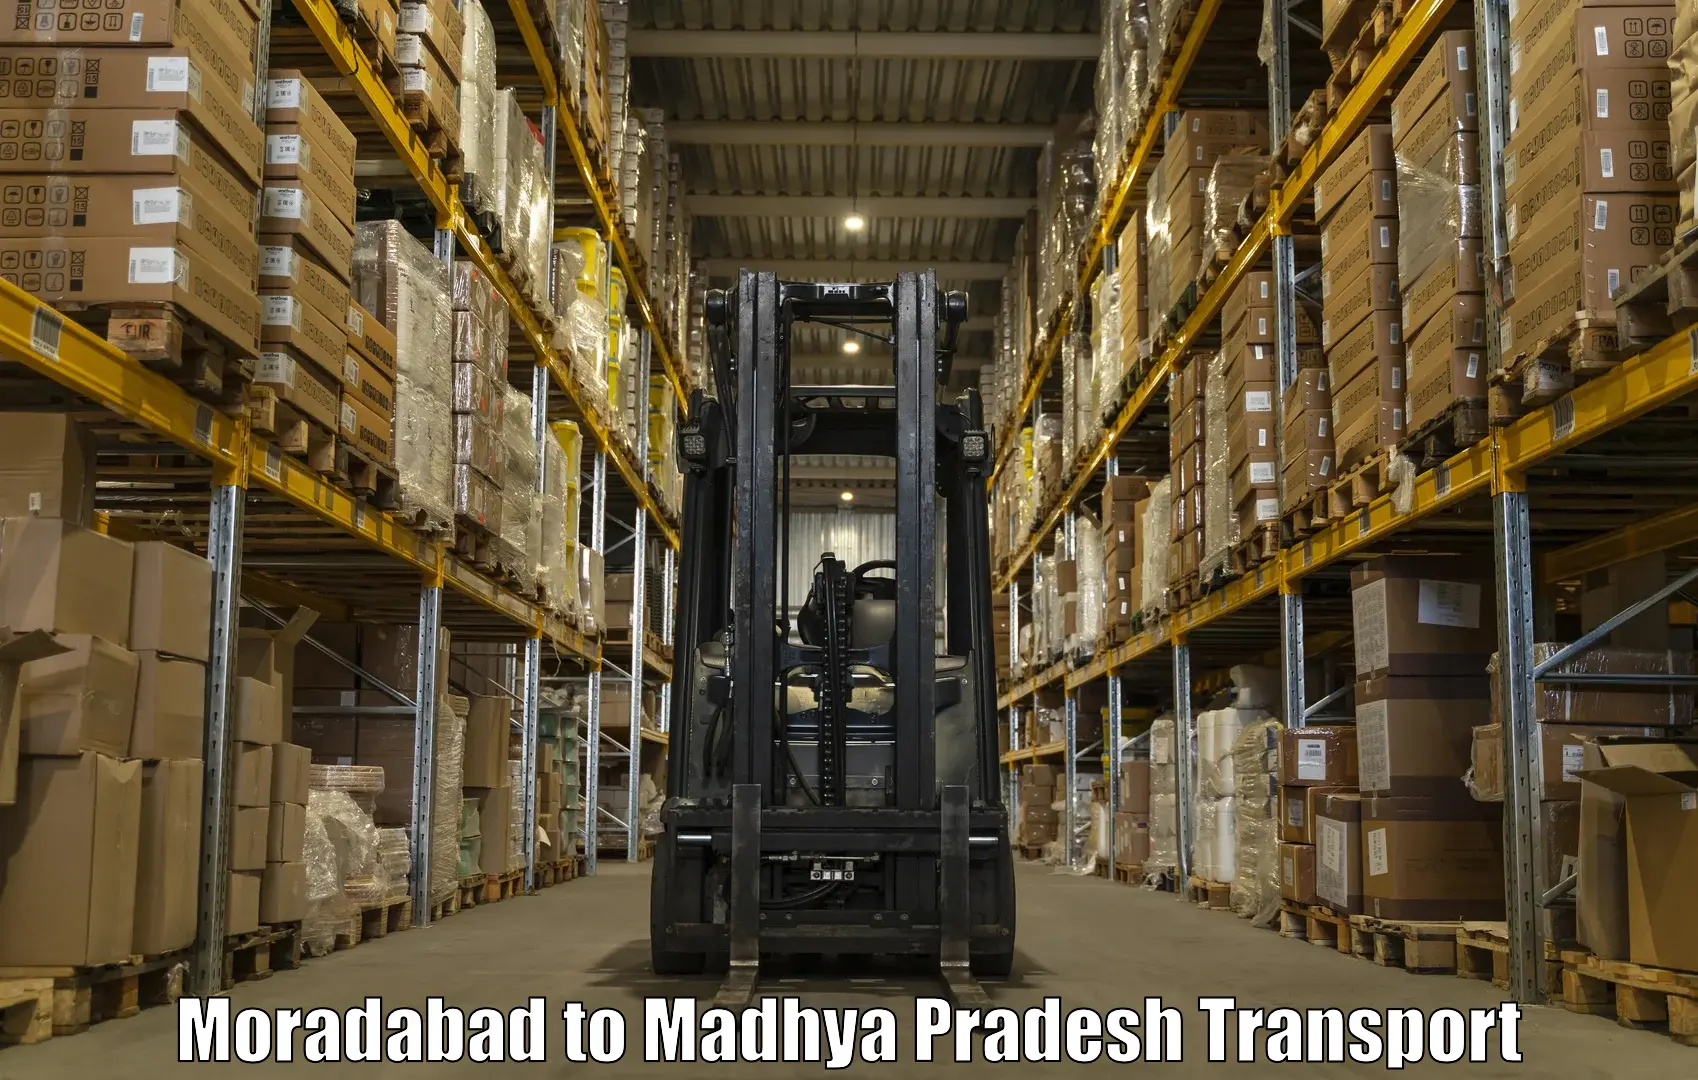 Daily parcel service transport Moradabad to Bhopal